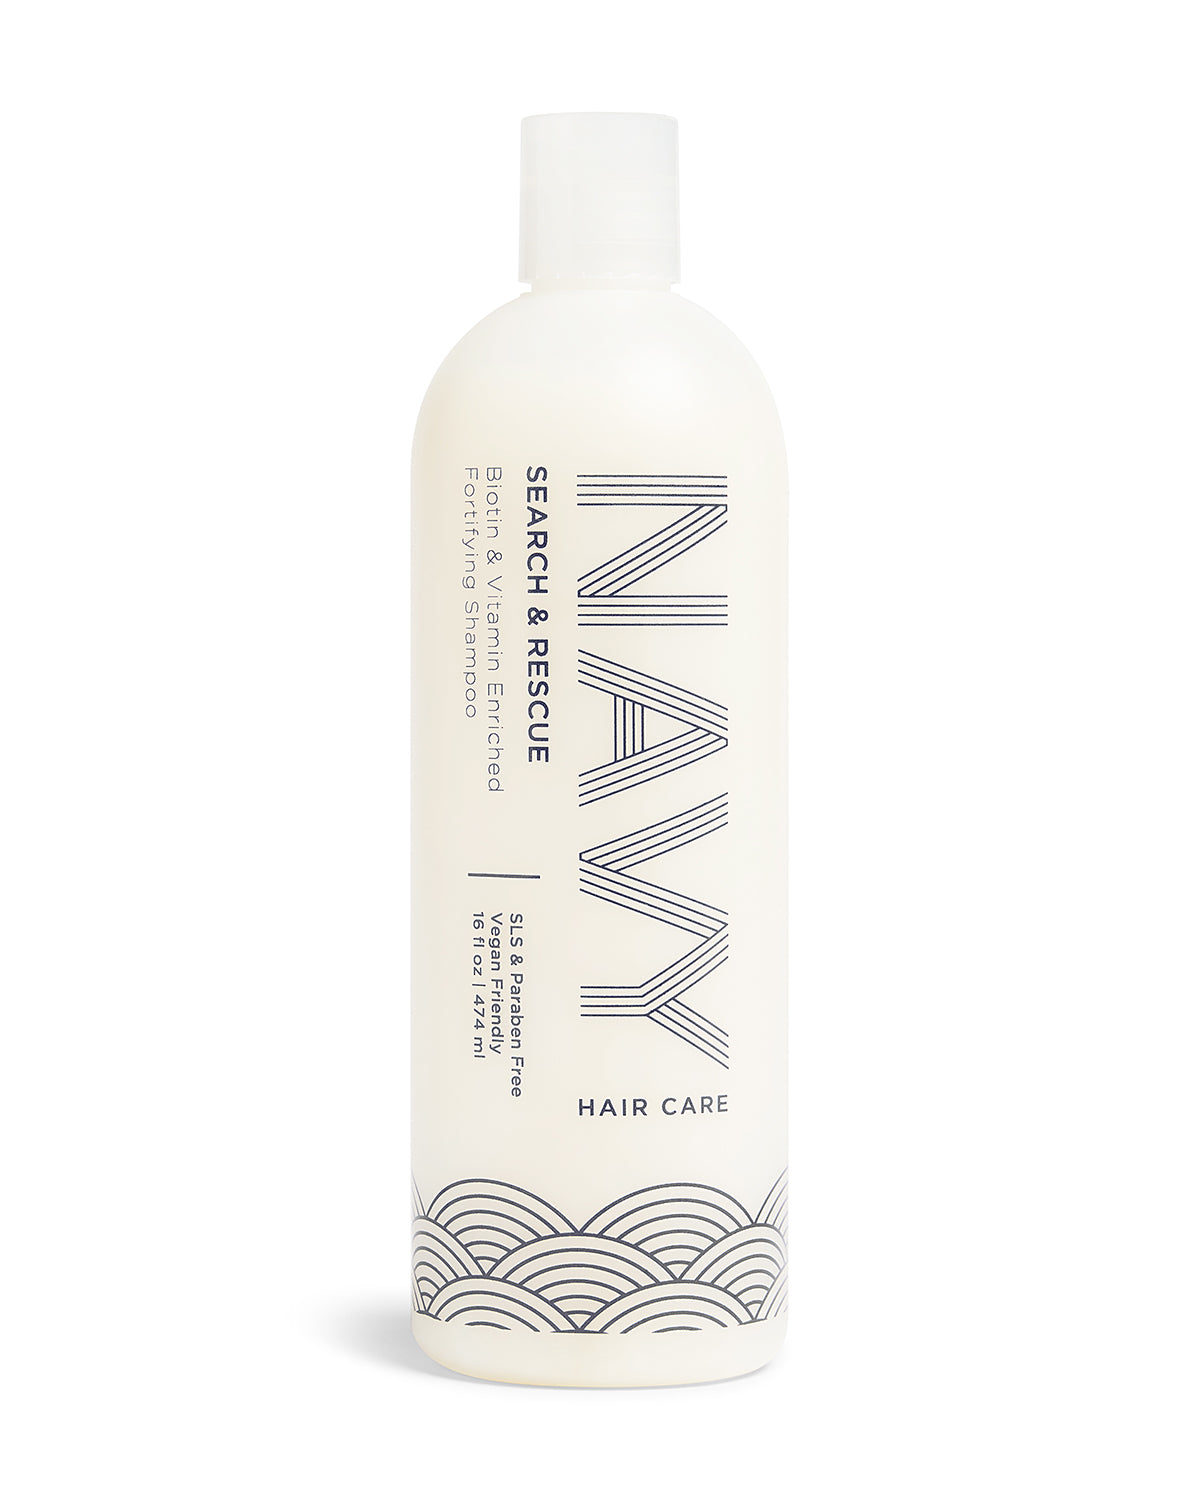 NAVY Hair Care Products, 23246 votes, 7 reviews - Shop & Review